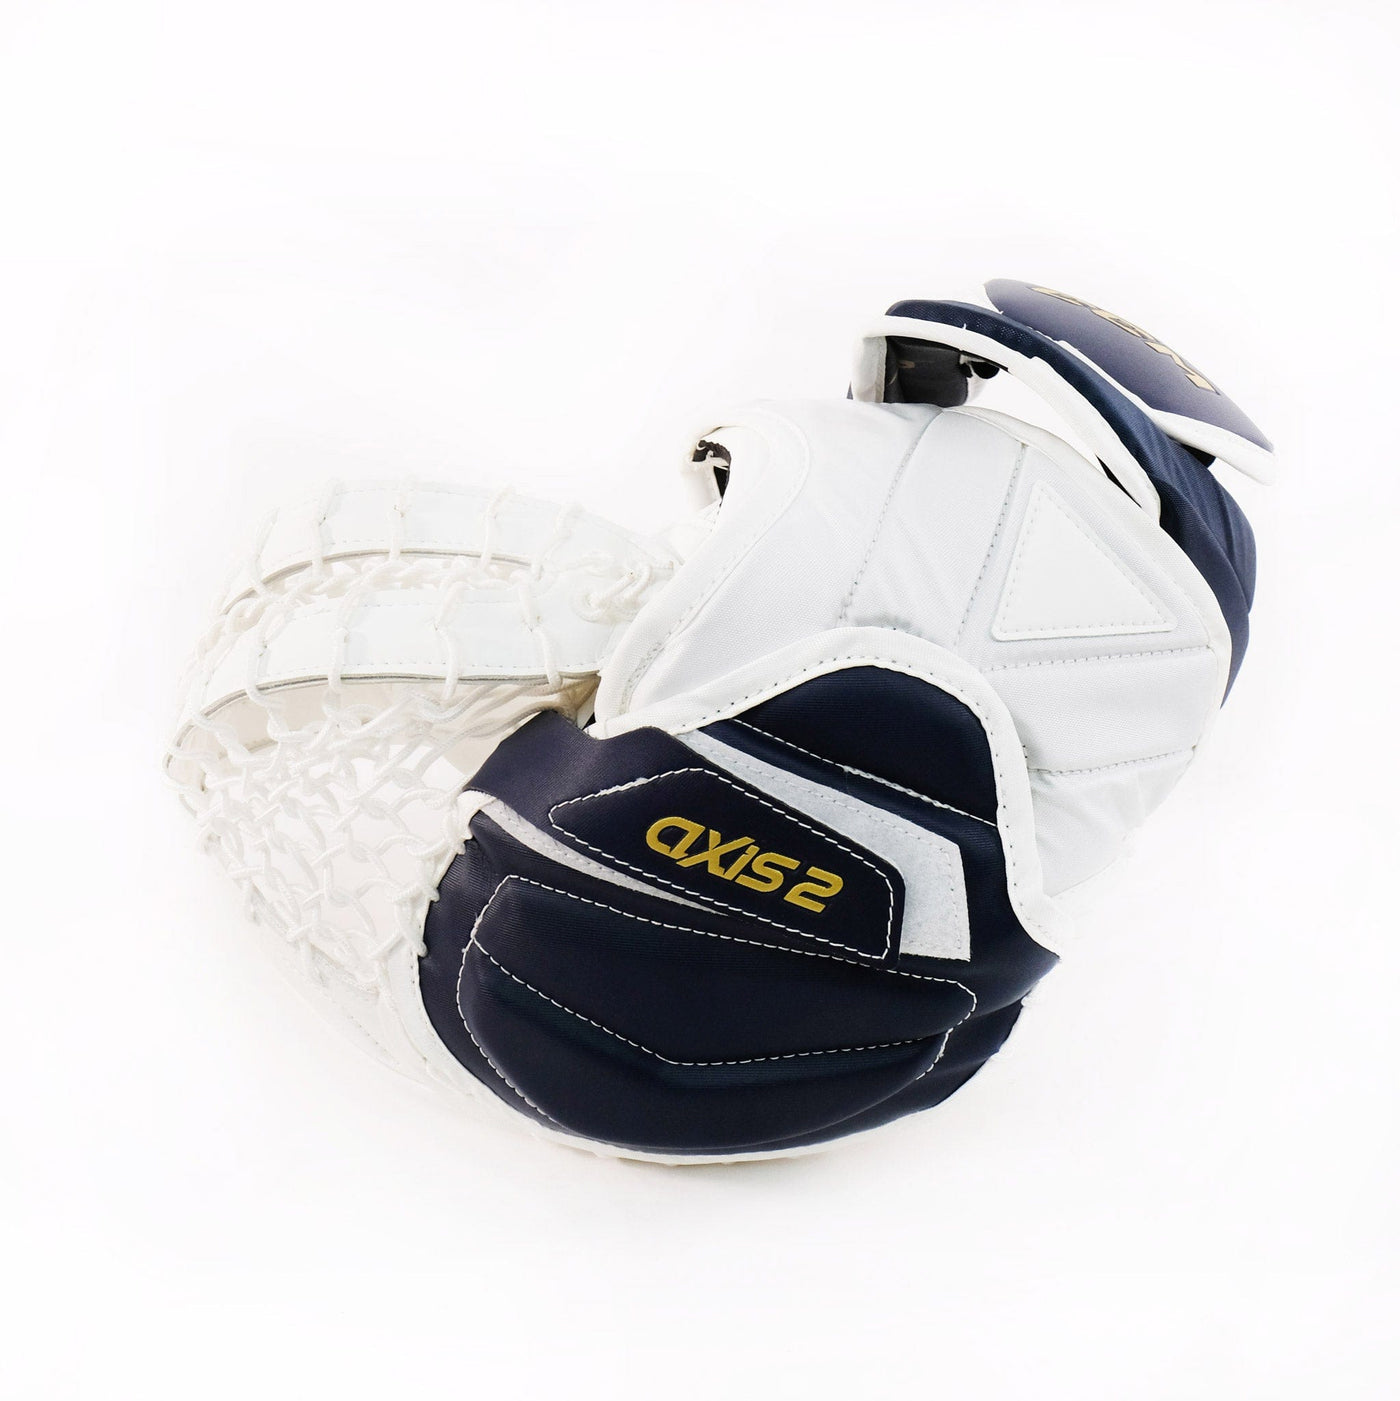 CCM Axis 2 Senior Goalie Catcher - 591 Degree - The Hockey Shop Source For Sports